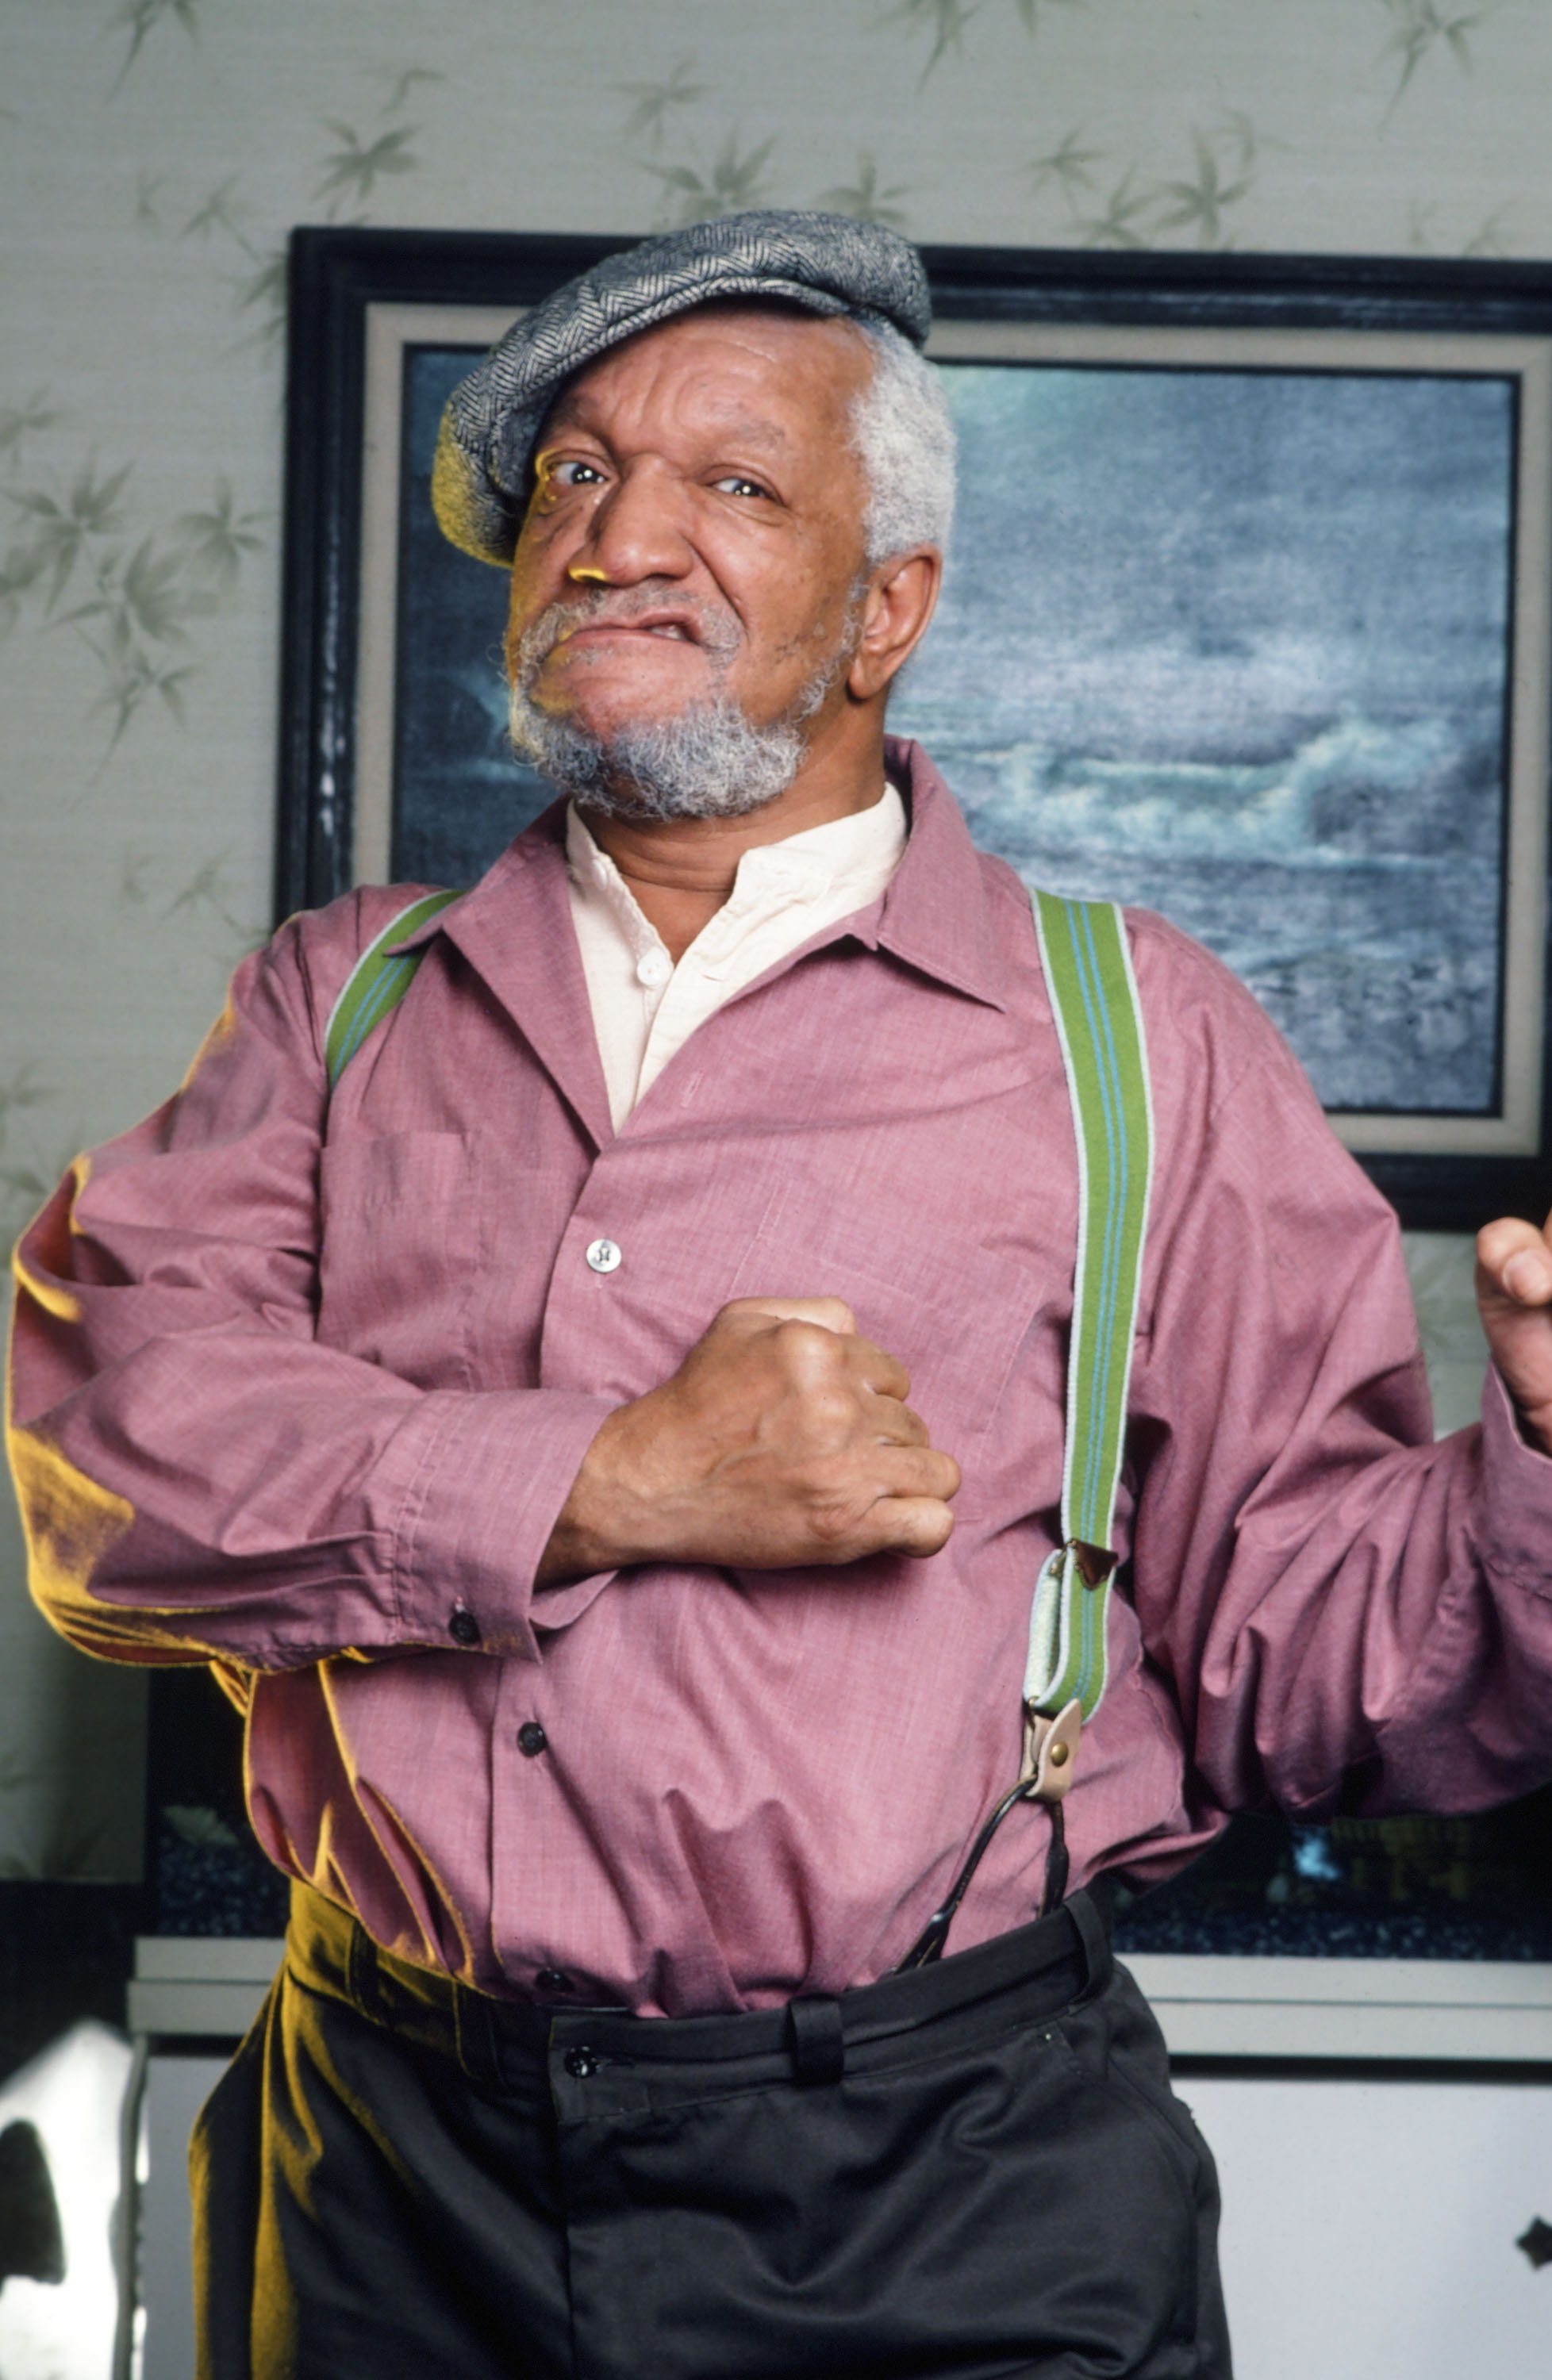 Redd Foxx photographed on the first season of the sitcom, "Sanford and Son." | Source: Getty Images